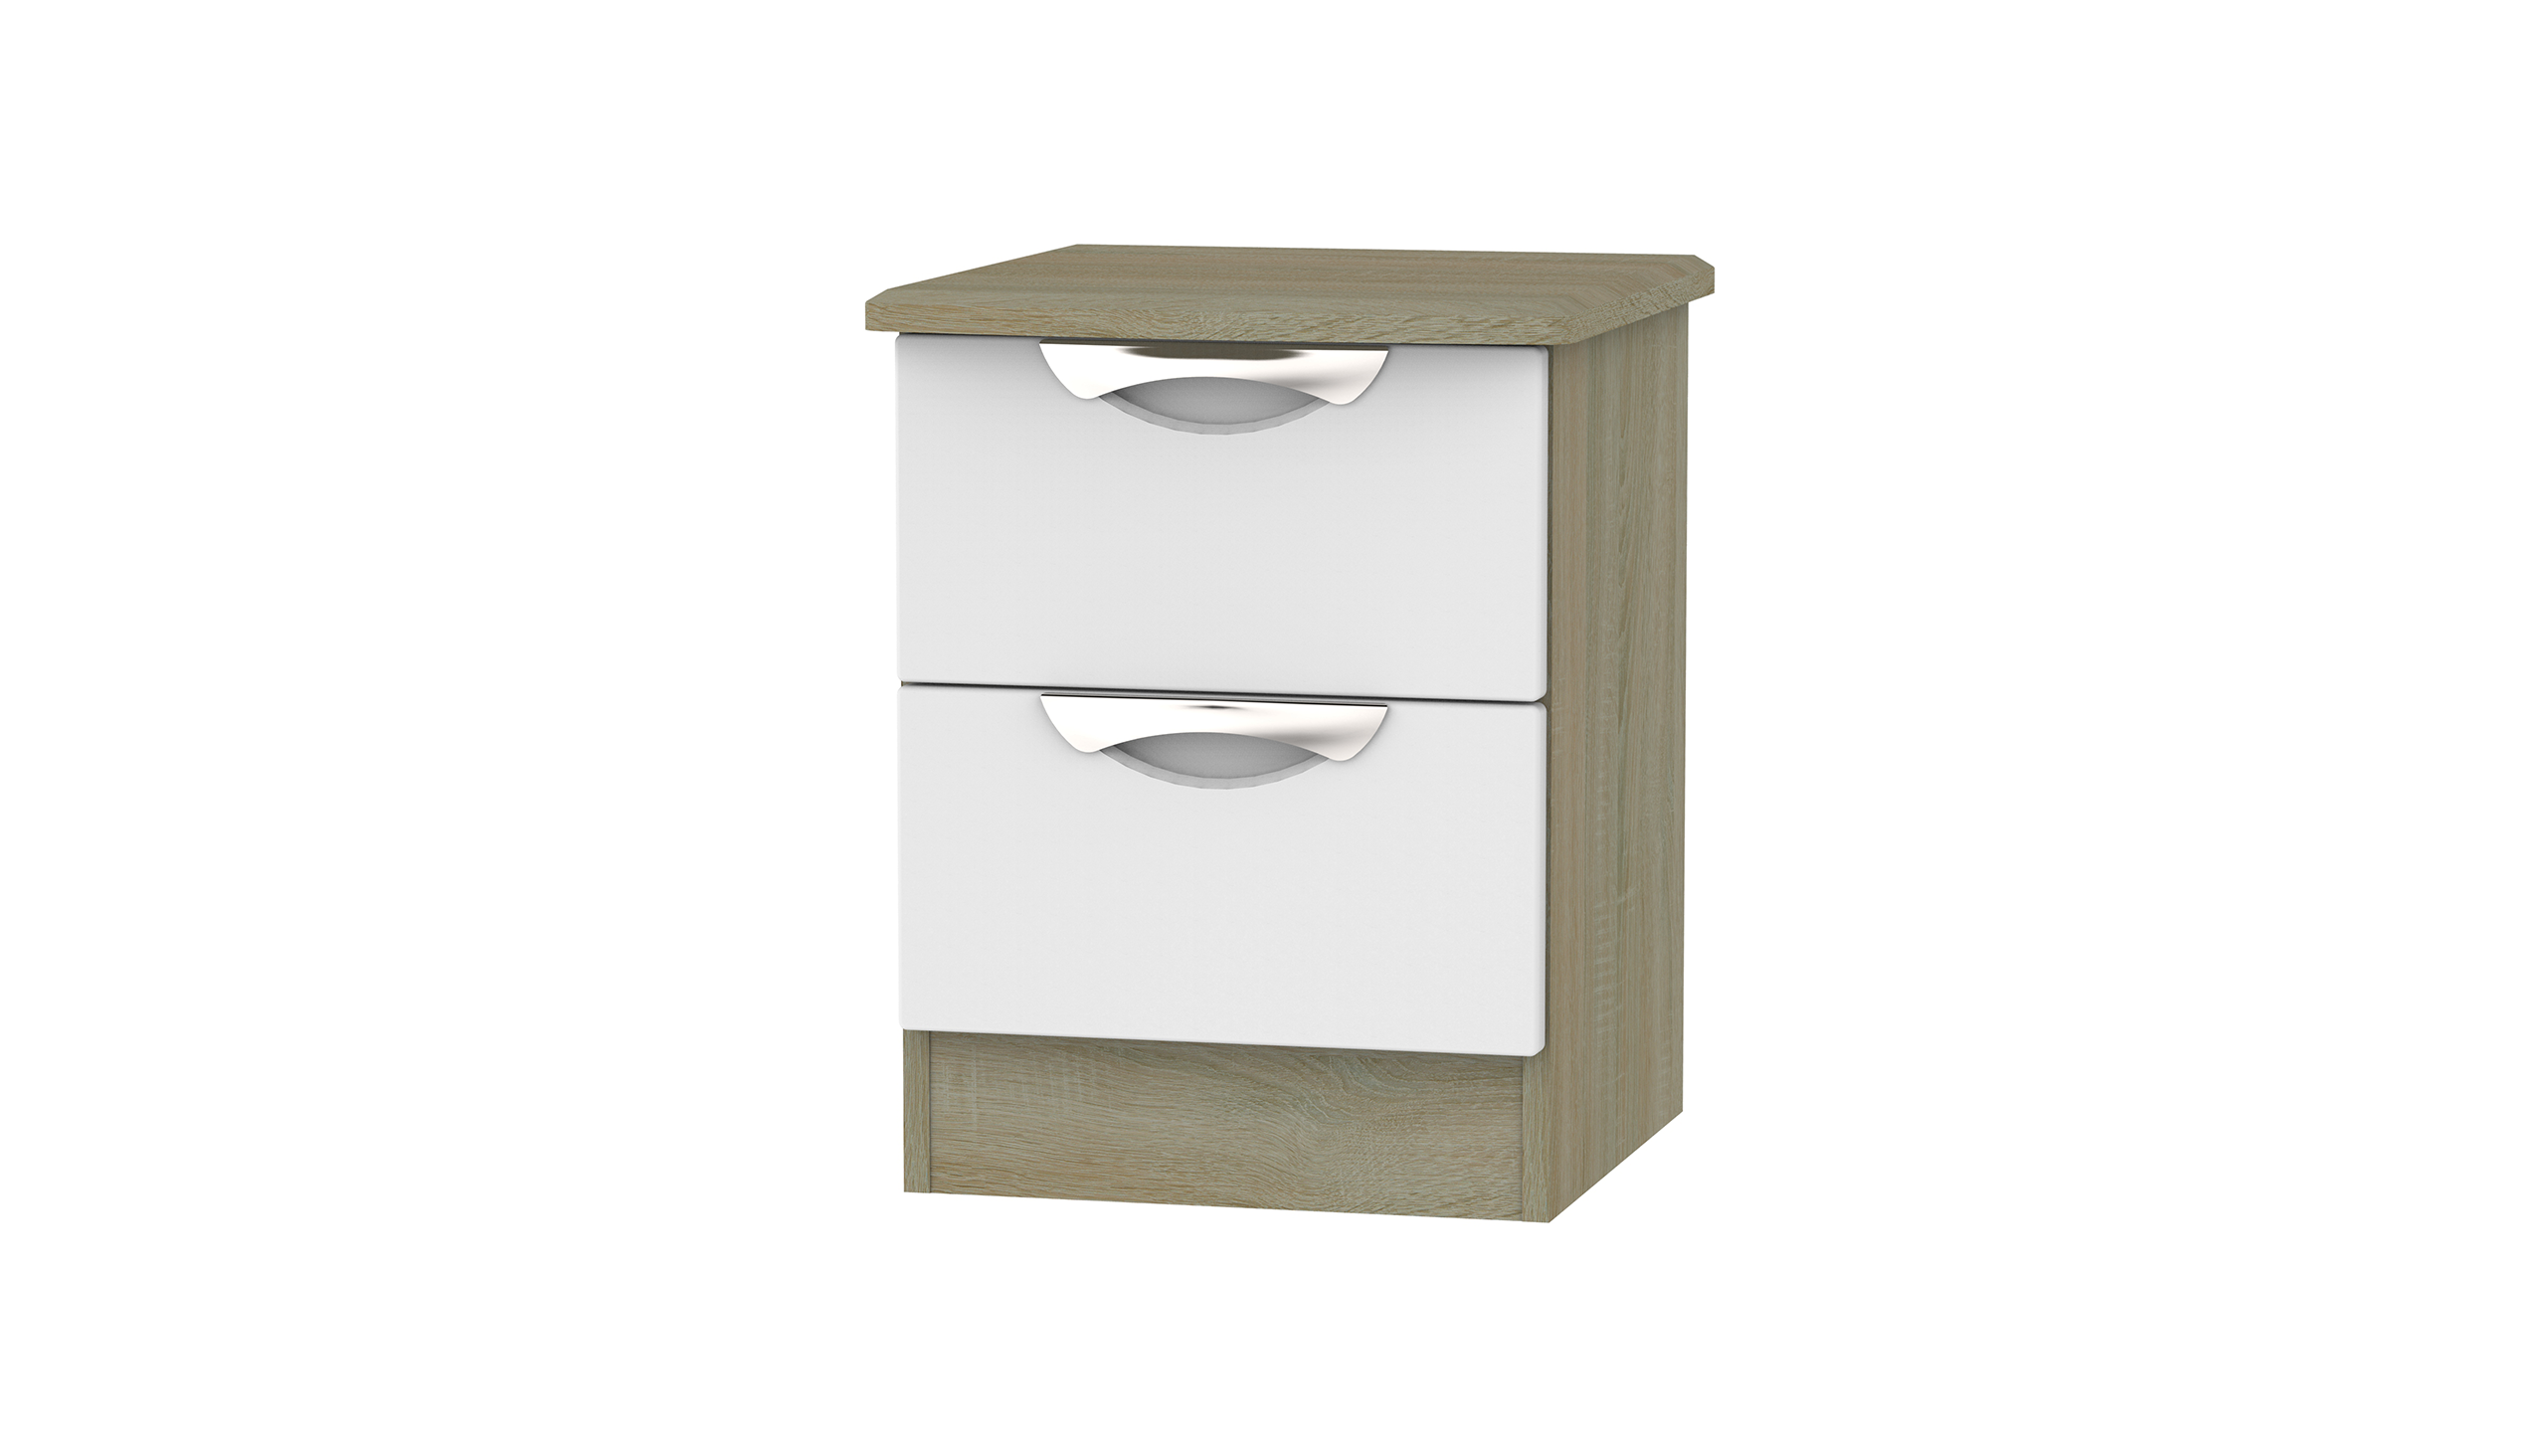 Moda 2 Drawer Bedside Chest with Wireless Charger